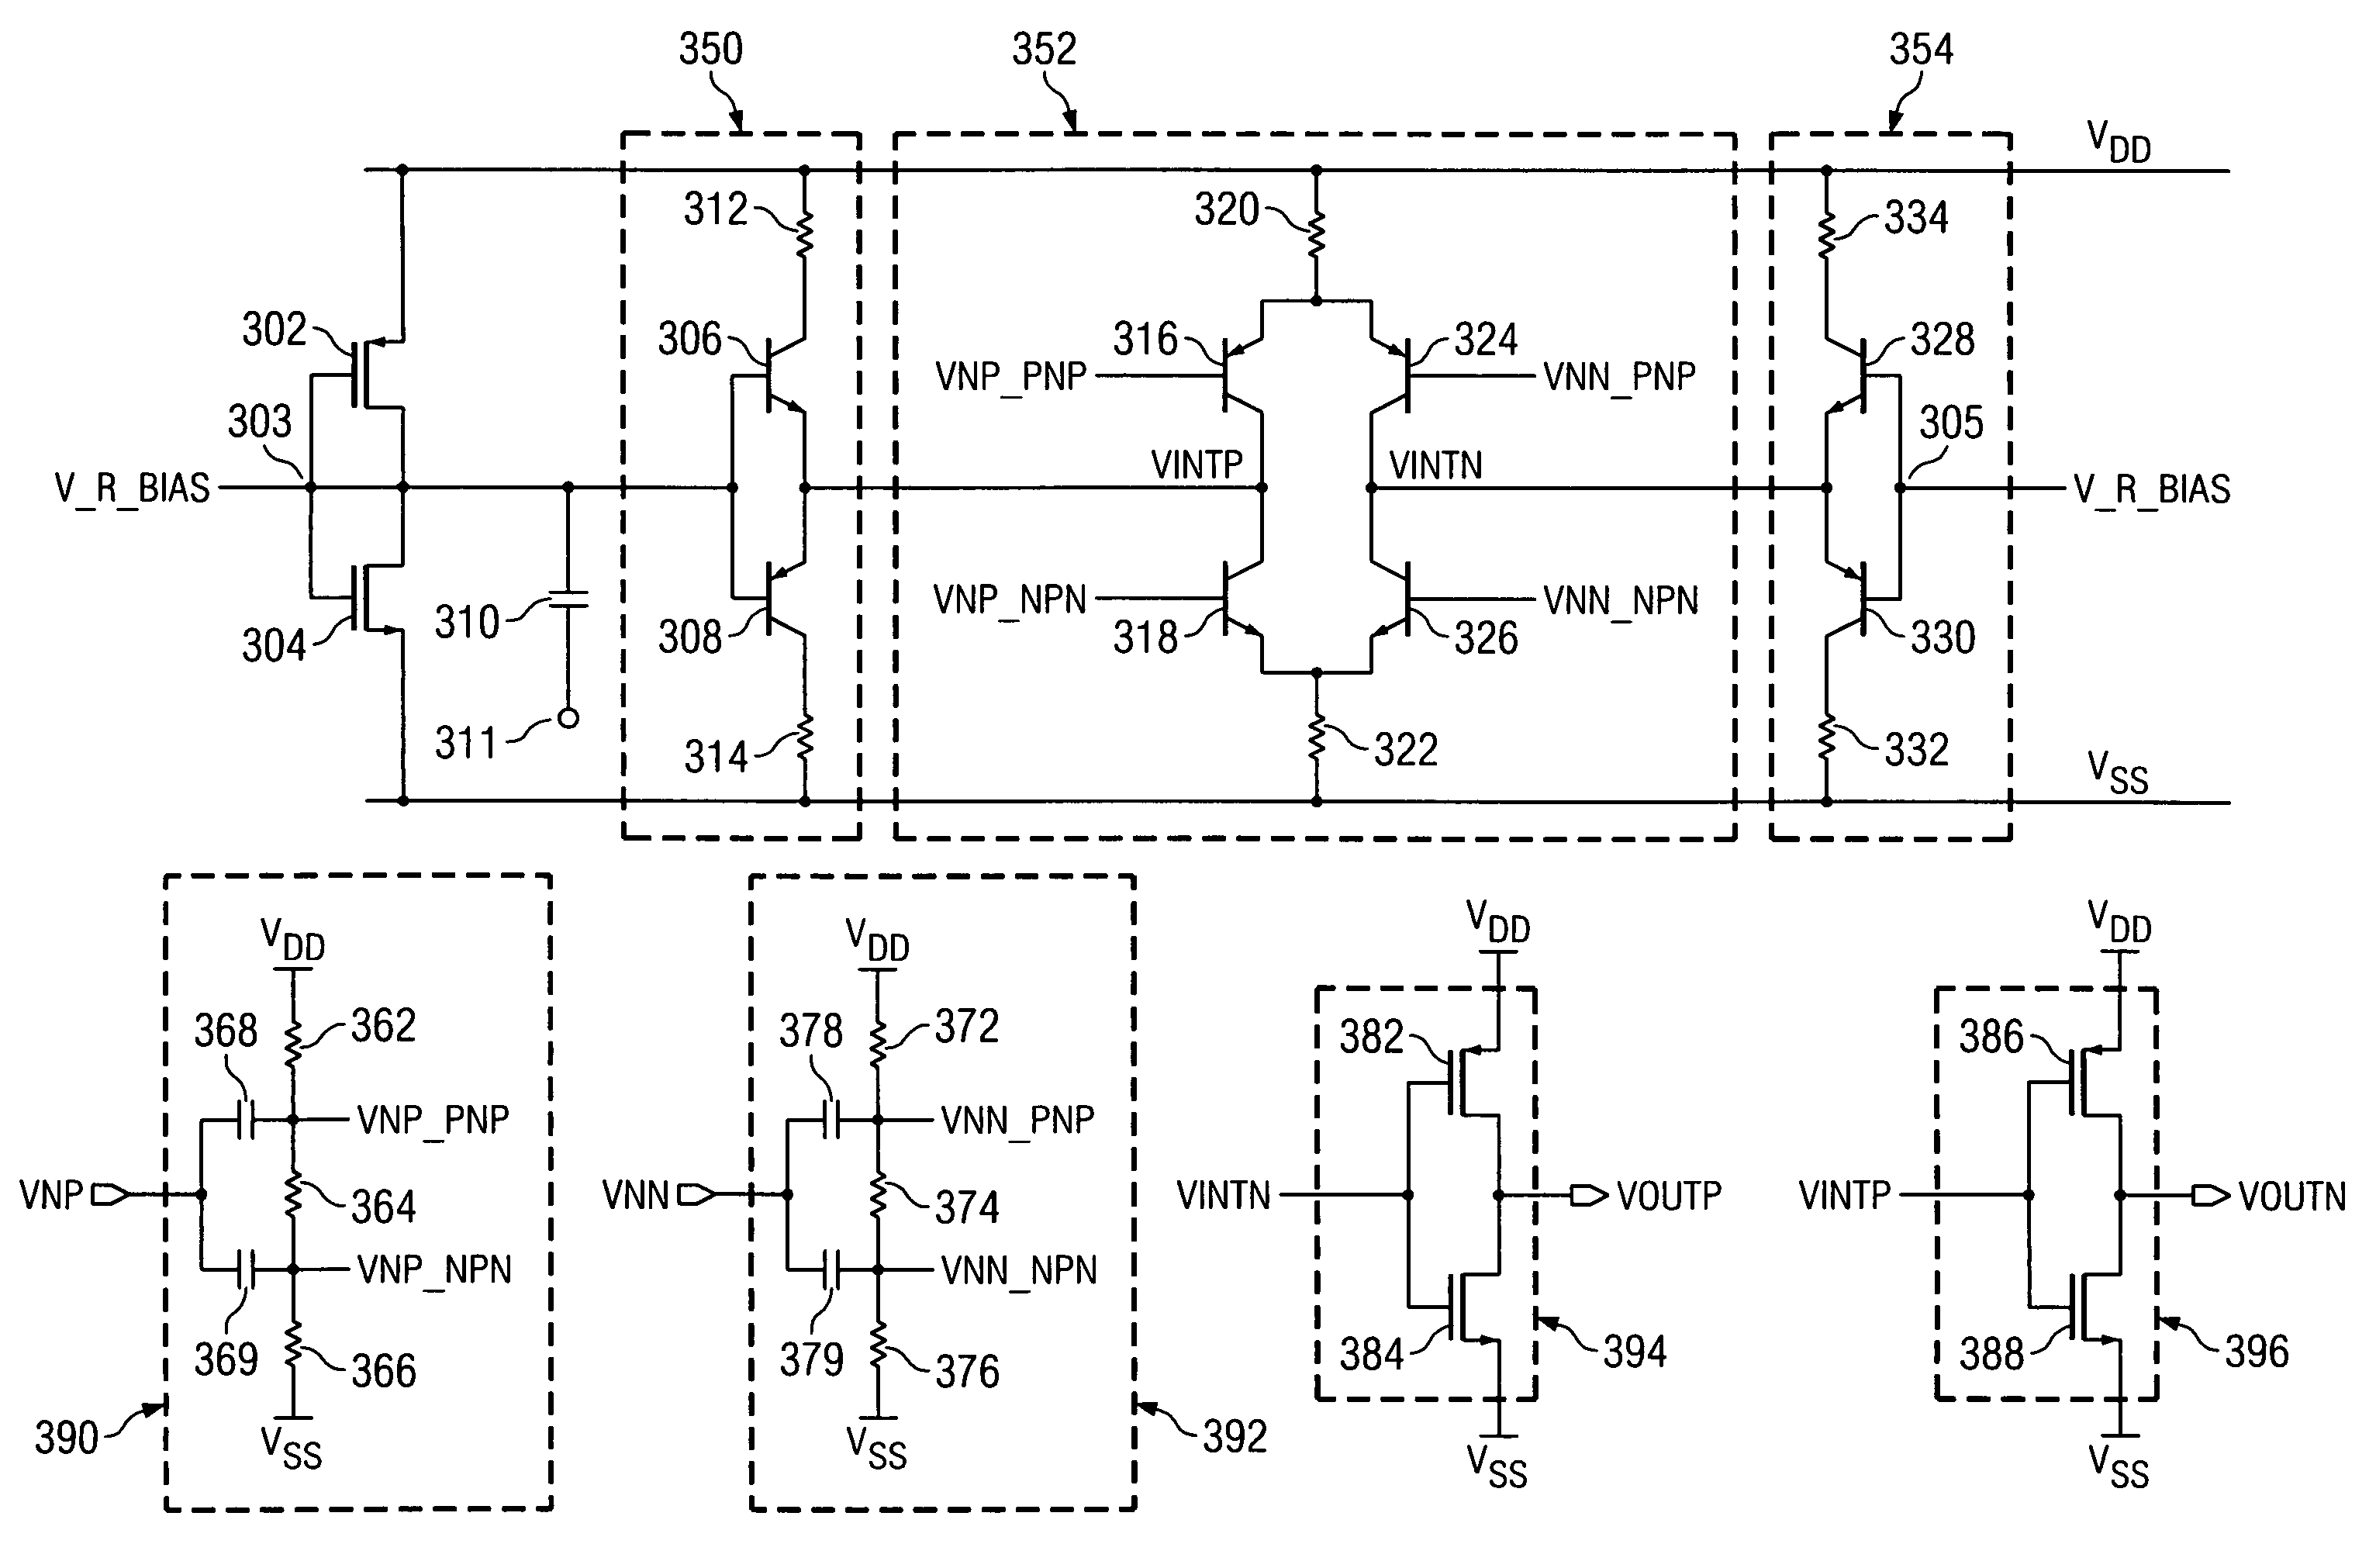 Method and apparatus for improved clock preamplifier with low jitter